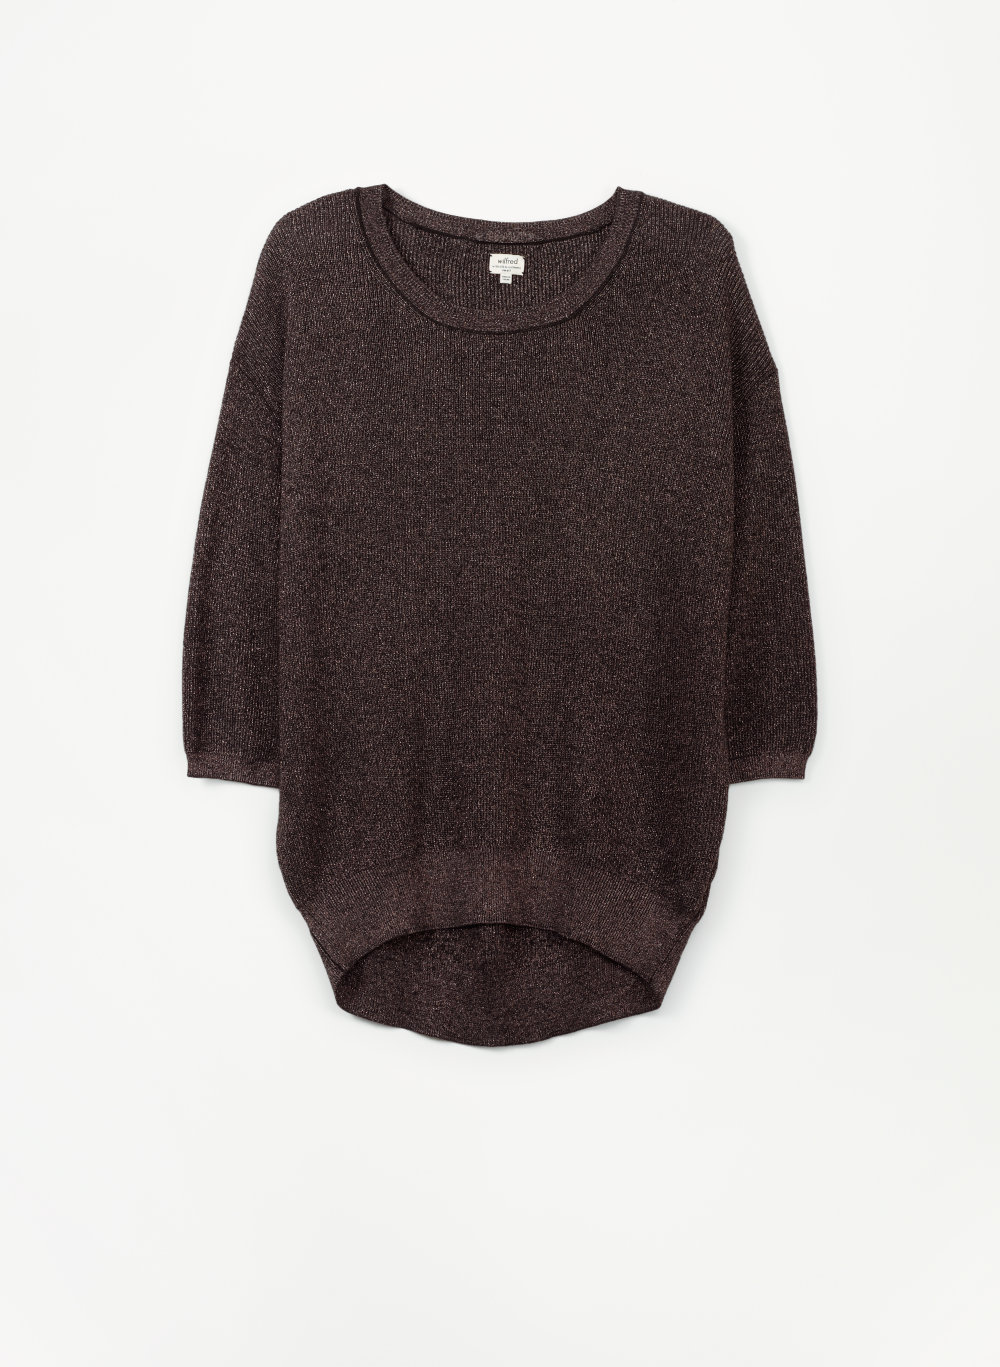 Cocoon Wilfred Sweater